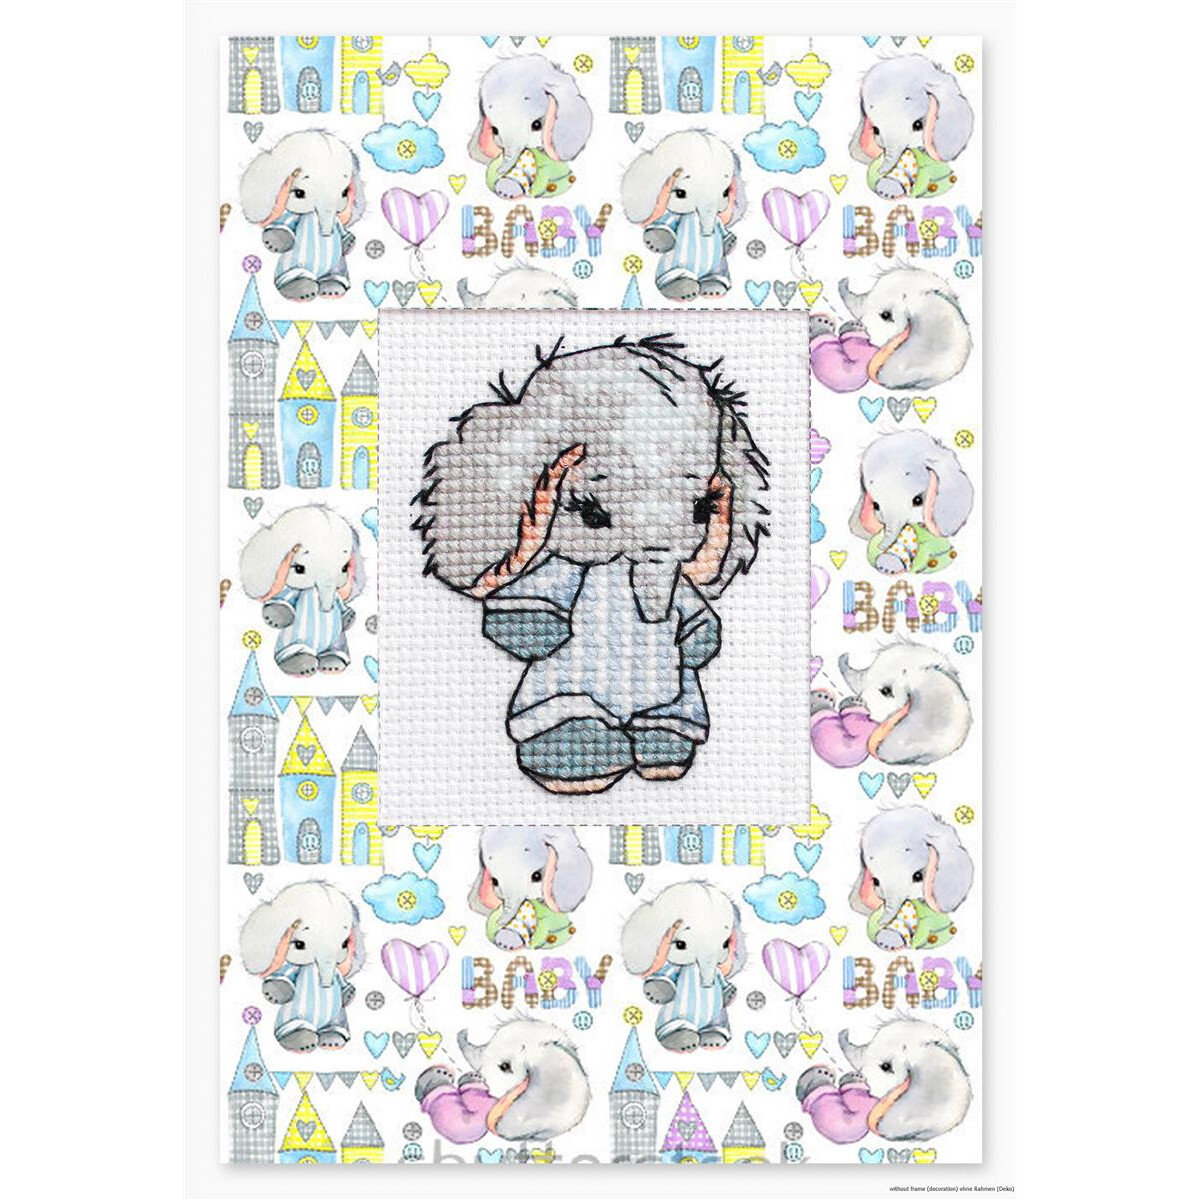 Luca-S counted Cross Stitch kit Postcard "Baby...